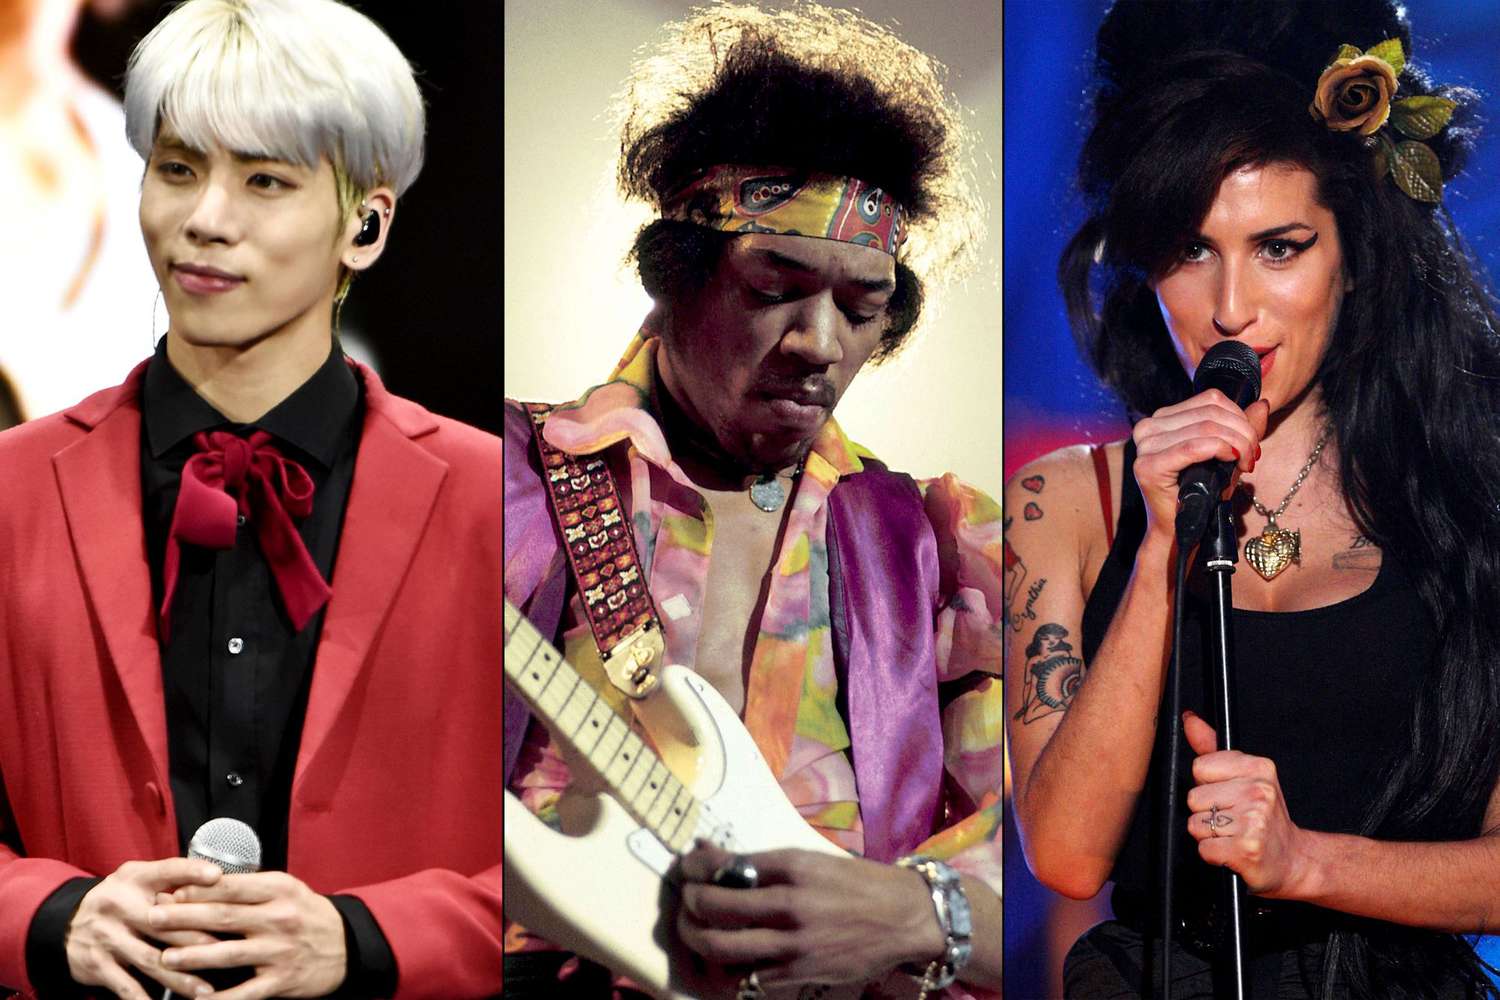 GALLERY: Musicians Who Died at 27